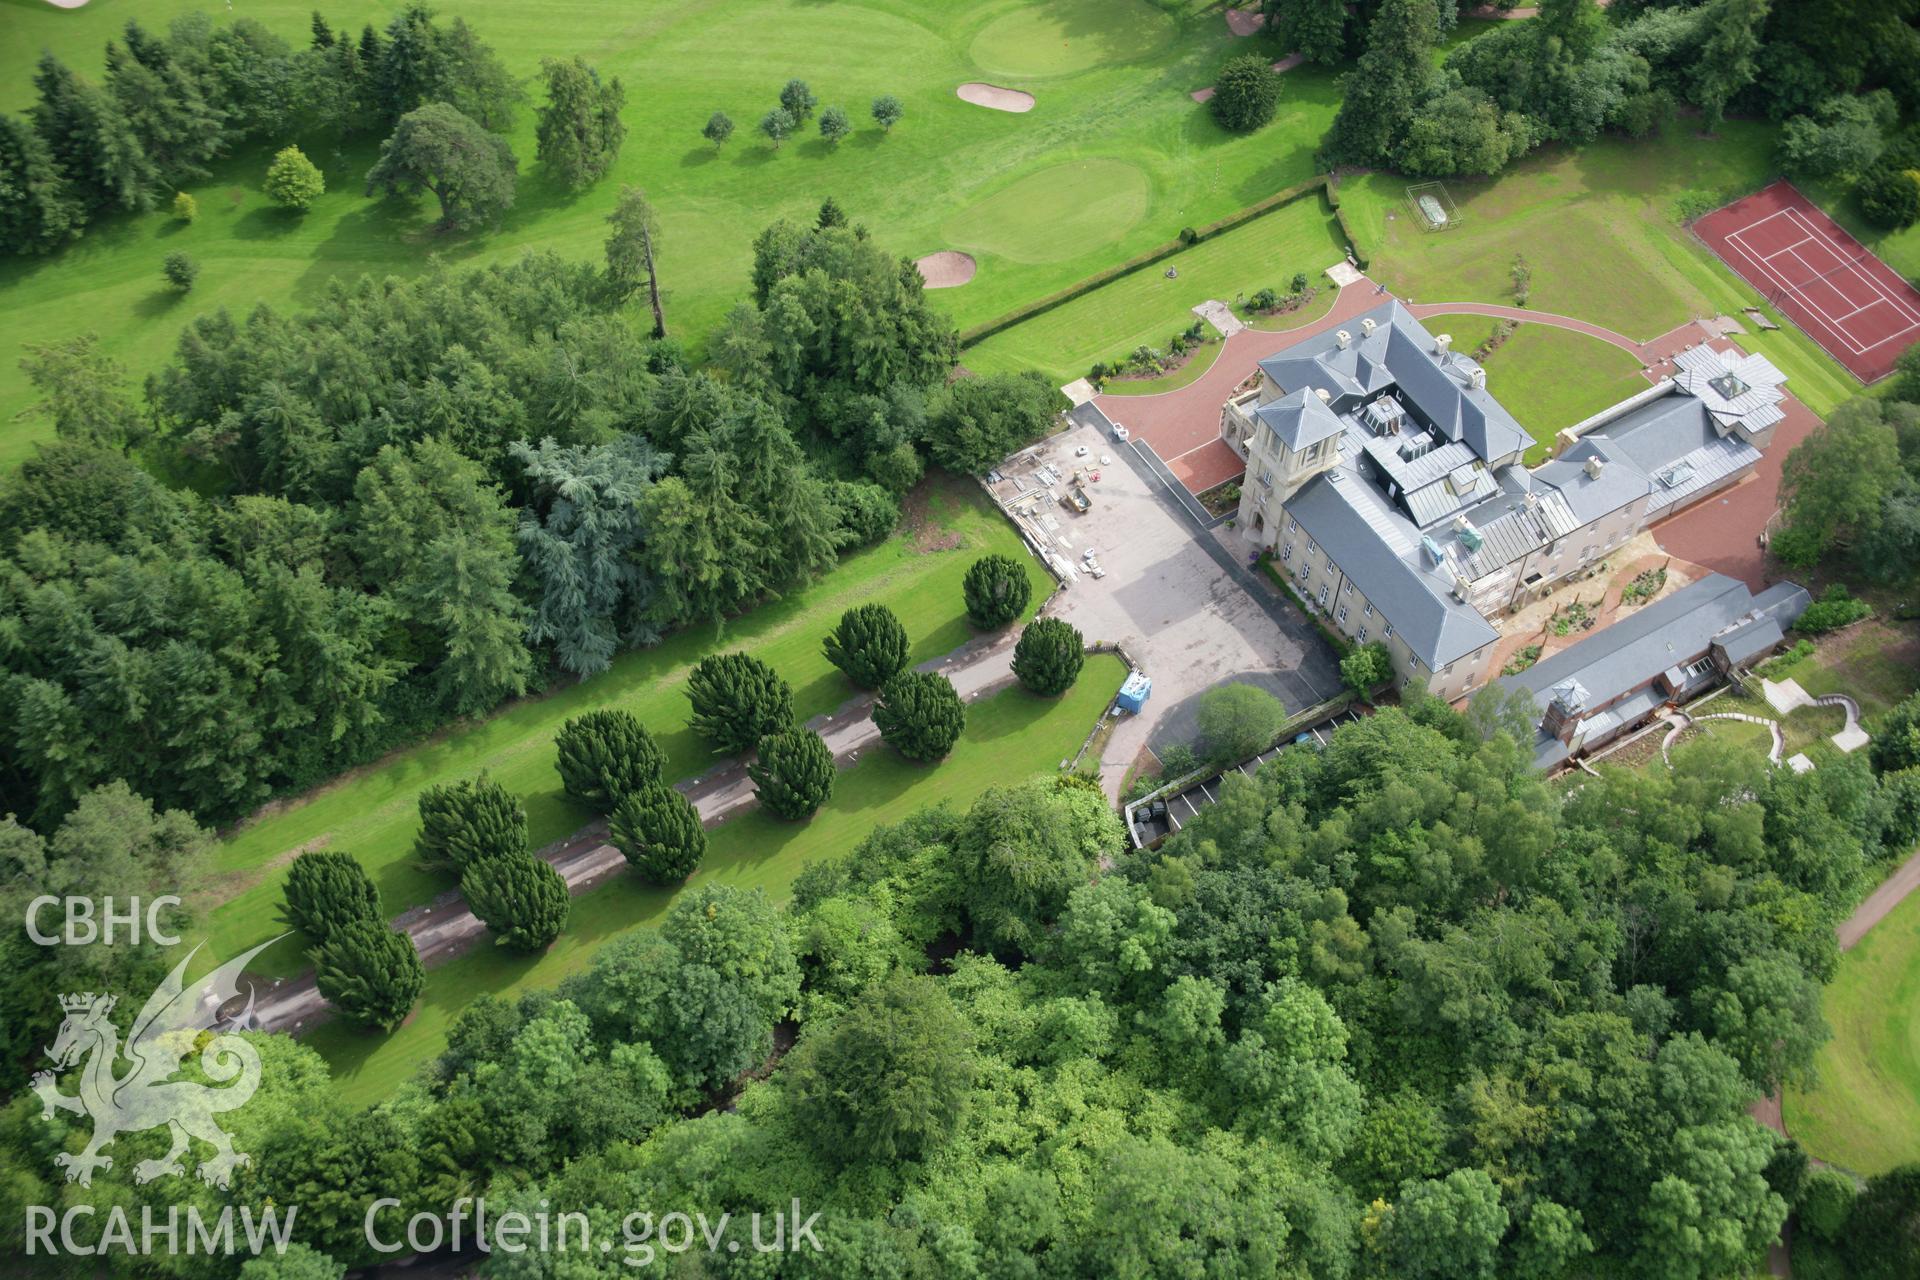 RCAHMW colour oblique aerial photograph of Penoyre Country House and Garden. Taken on 09 July 2007 by Toby Driver